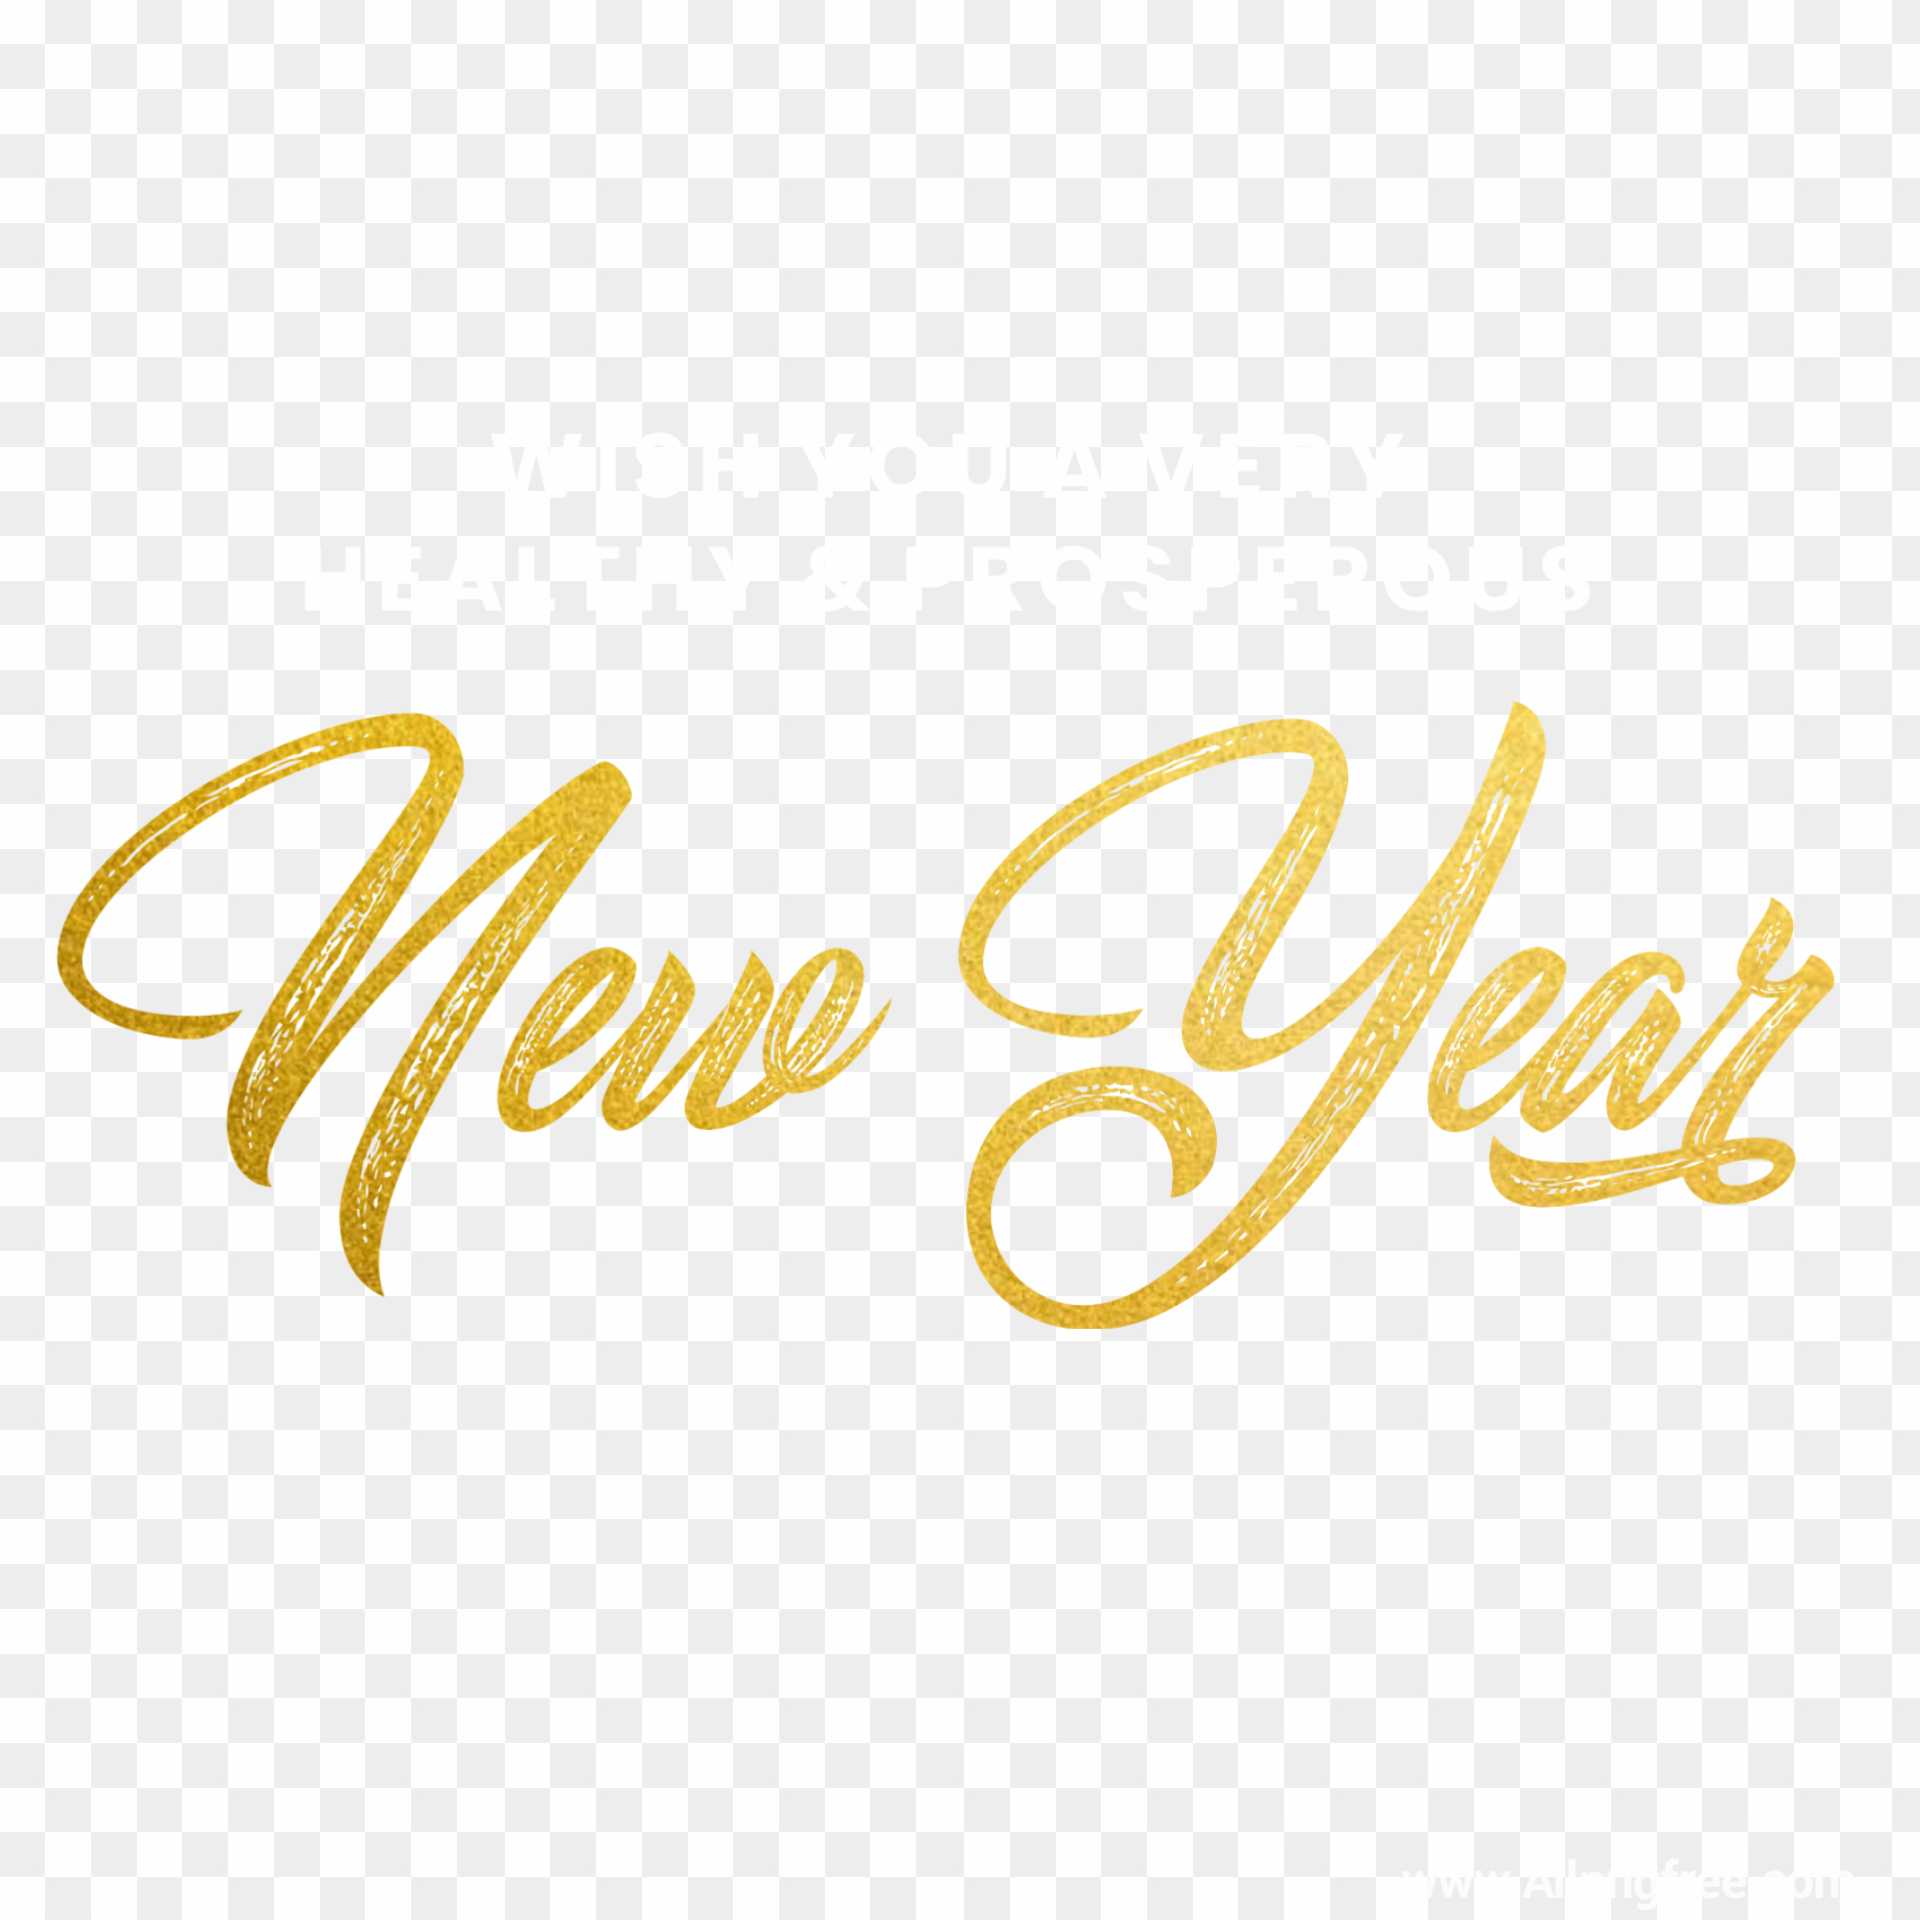 New year text PNG images